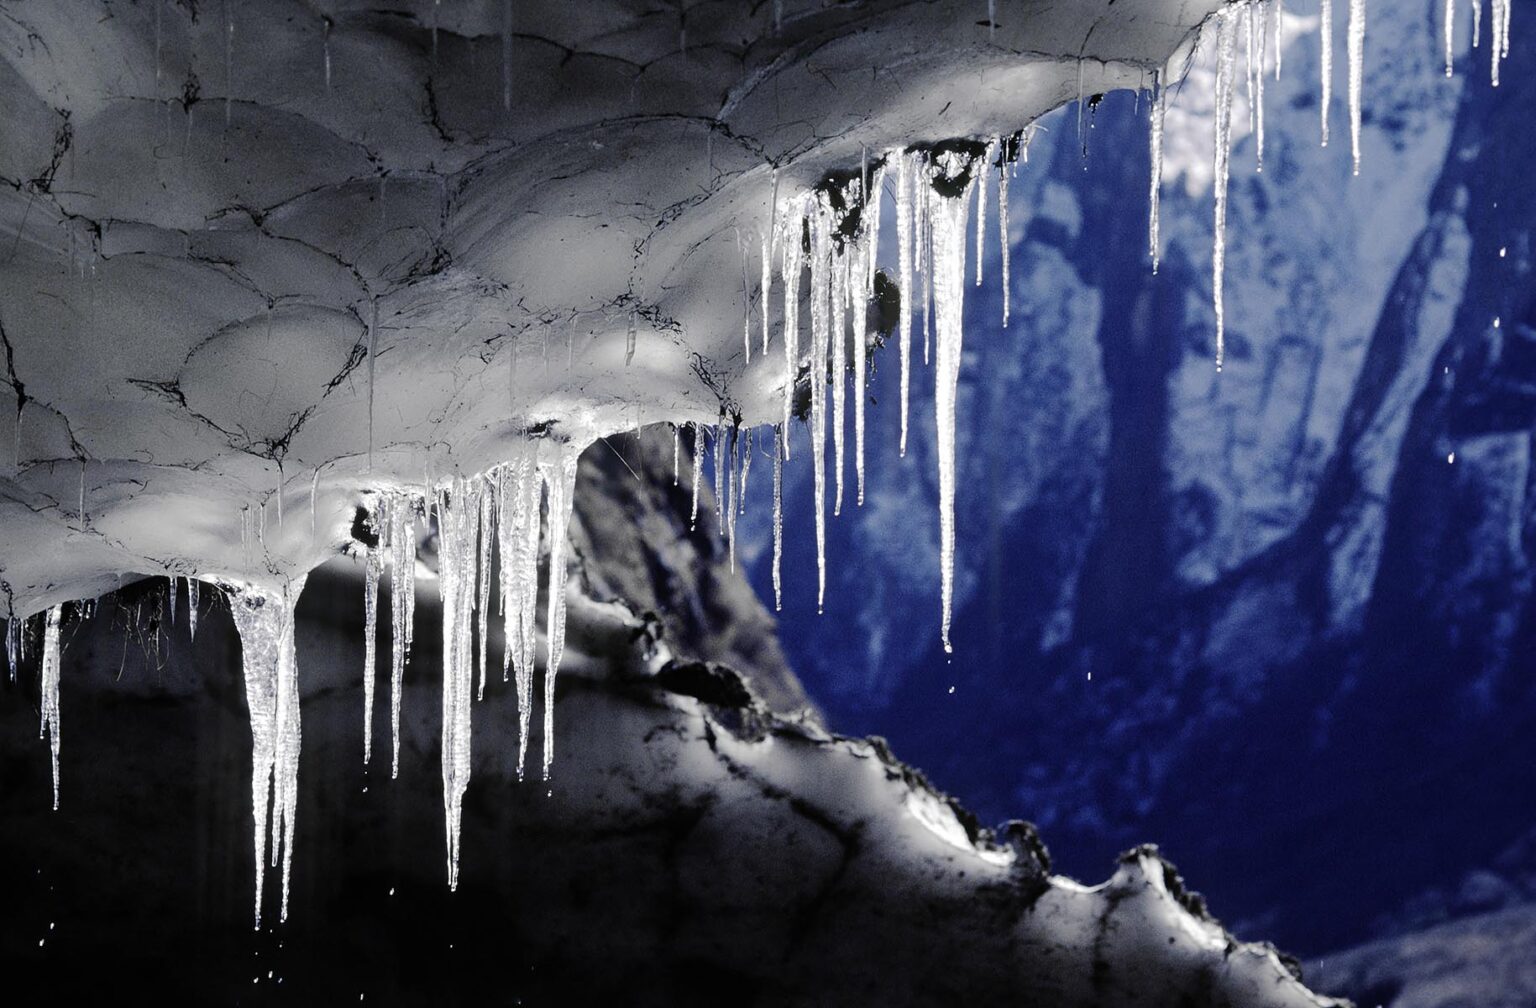 Sunlight illuminates WATER DRIPPING from ICICLES on the ceiling of a SNOW CAVE - ANNAPURNA SANCTUARY, NEPAL